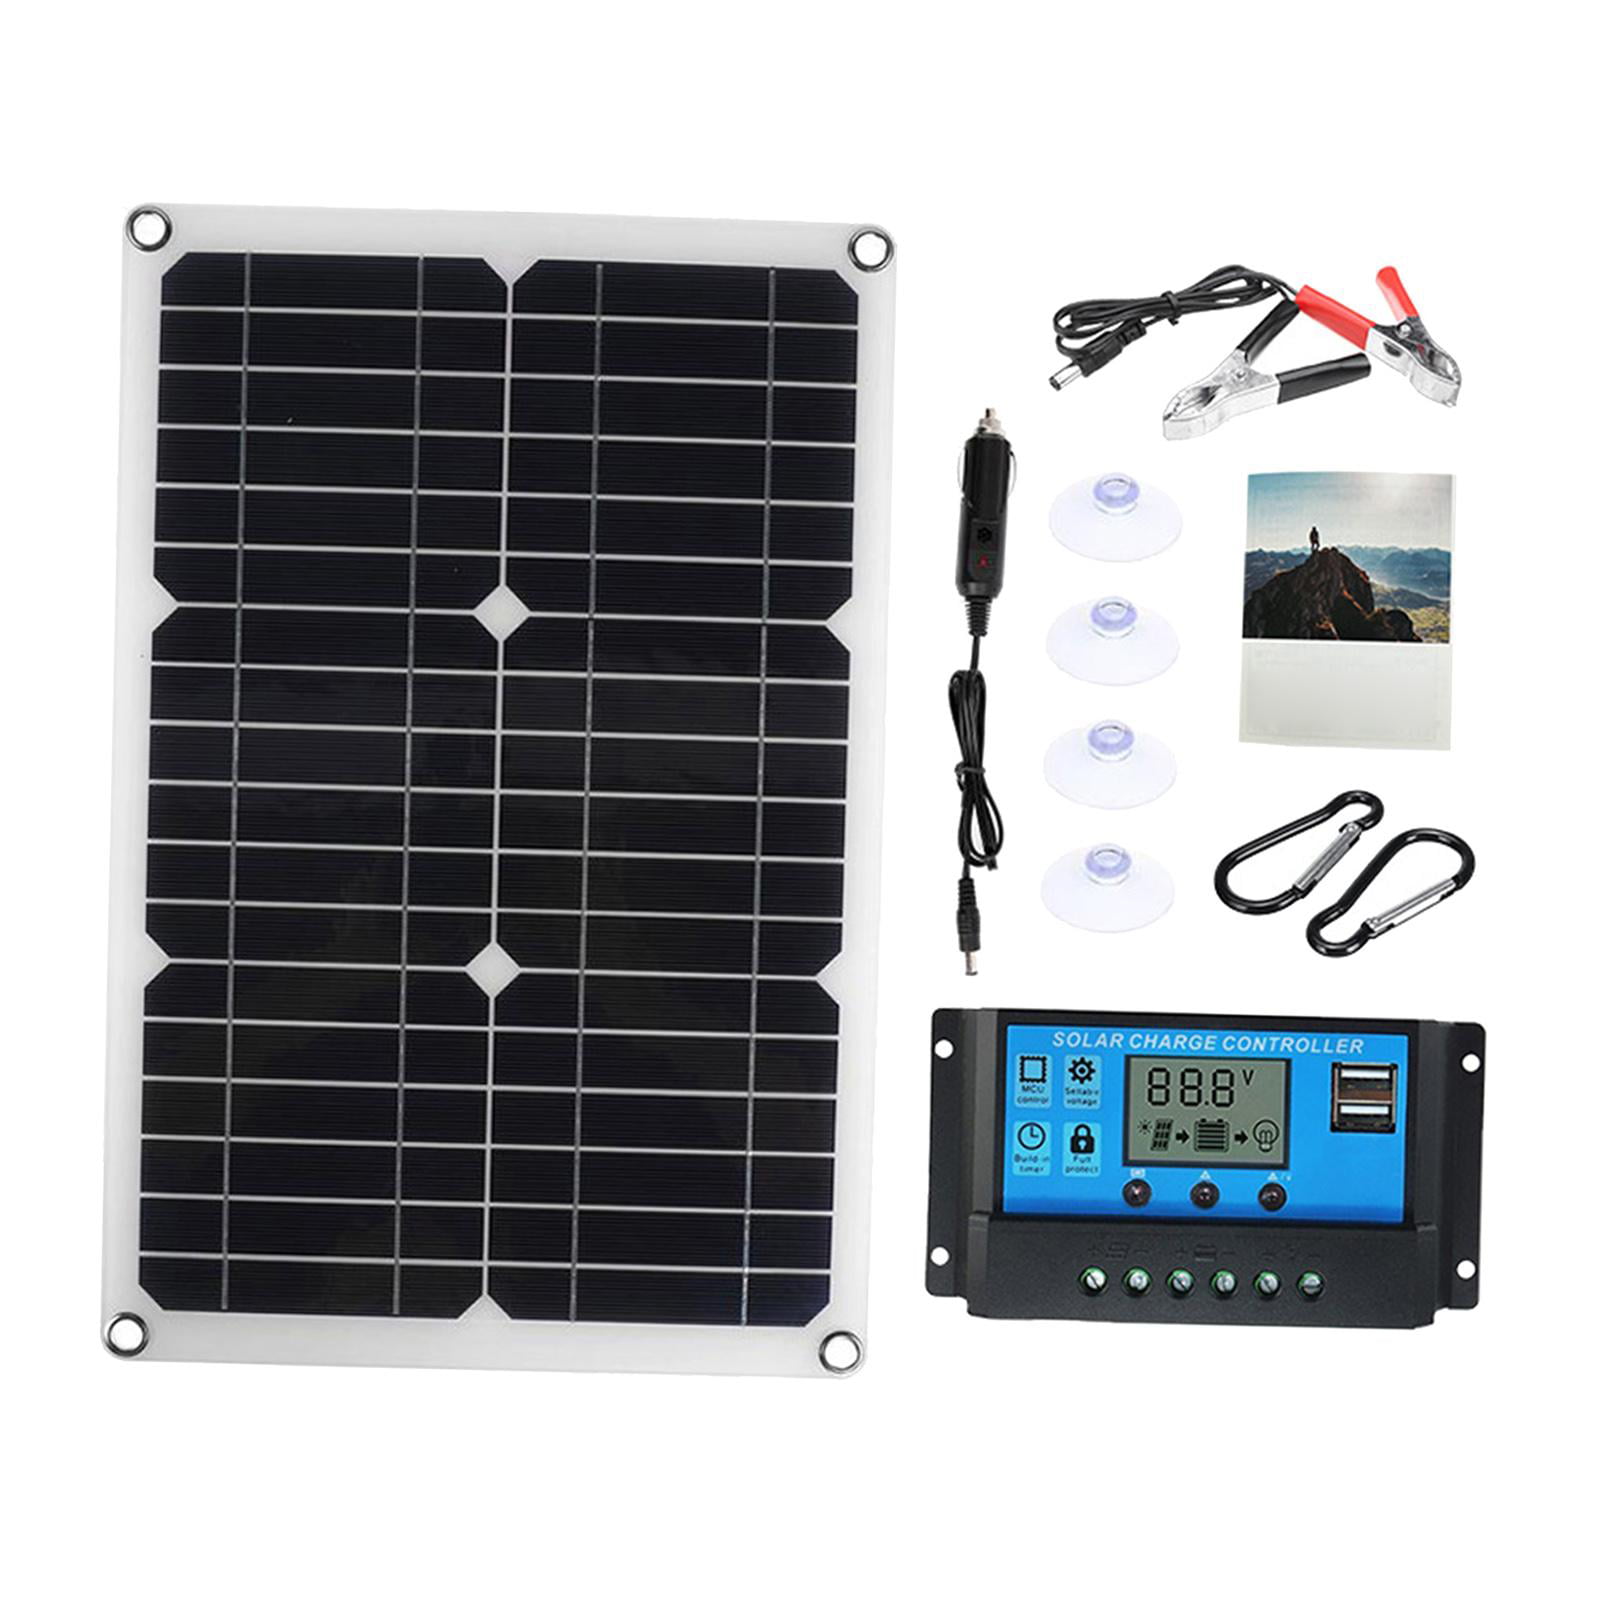 50W 12V/5V Solar Panel USB Battery Charger Car RV Boat Home 10A-40A Controller 